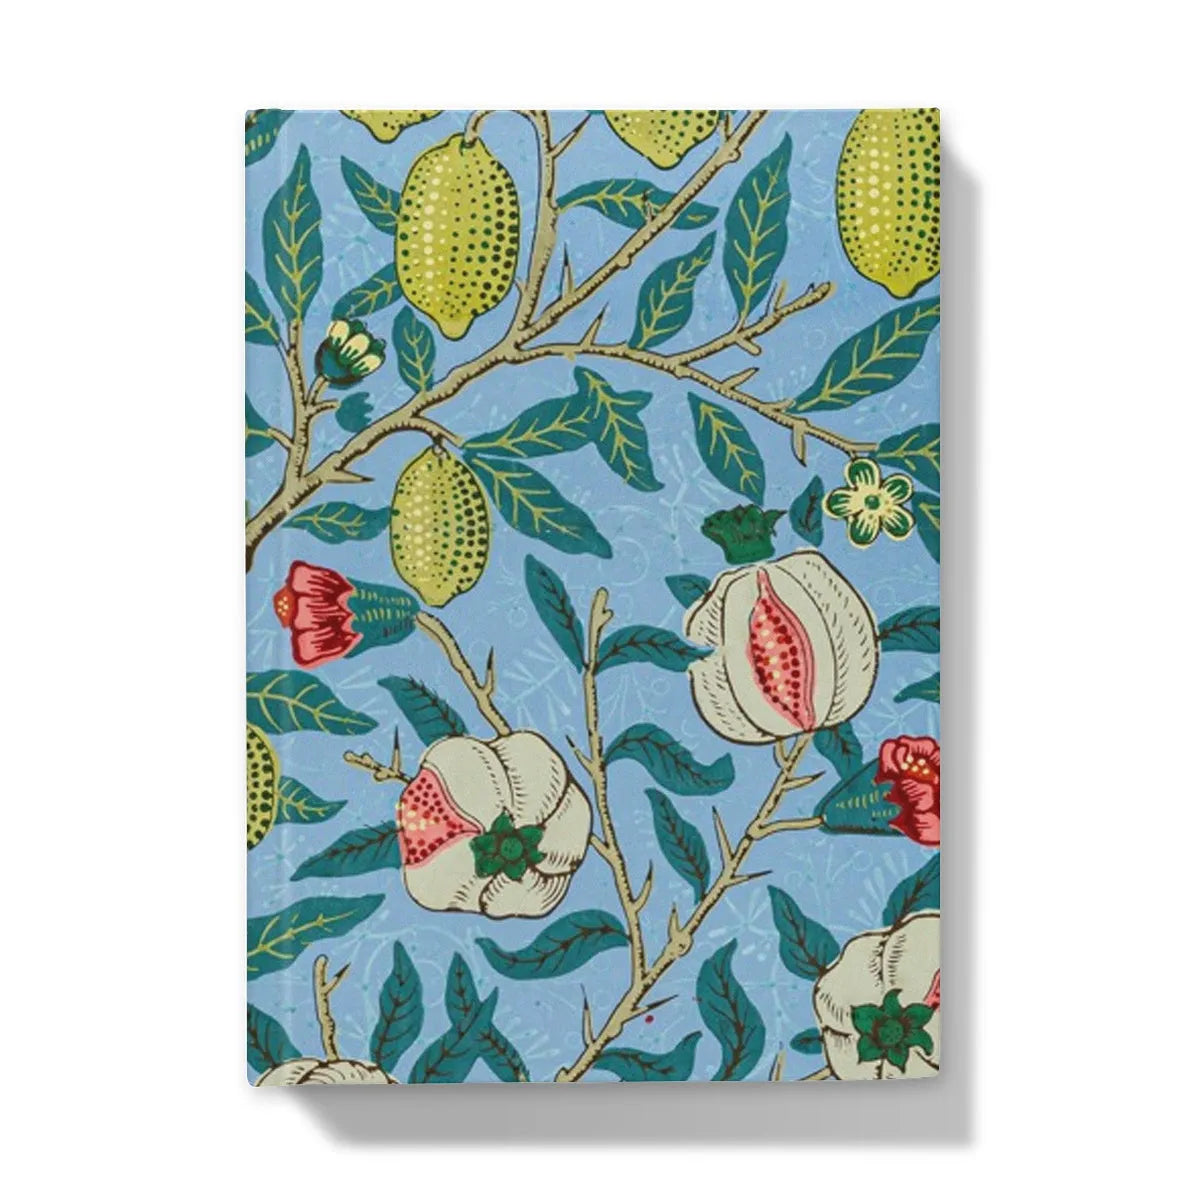 Four Fruits By William Morris Hardback Journal - 5’x7’ / Lined - Notebooks & Notepads - Aesthetic Art